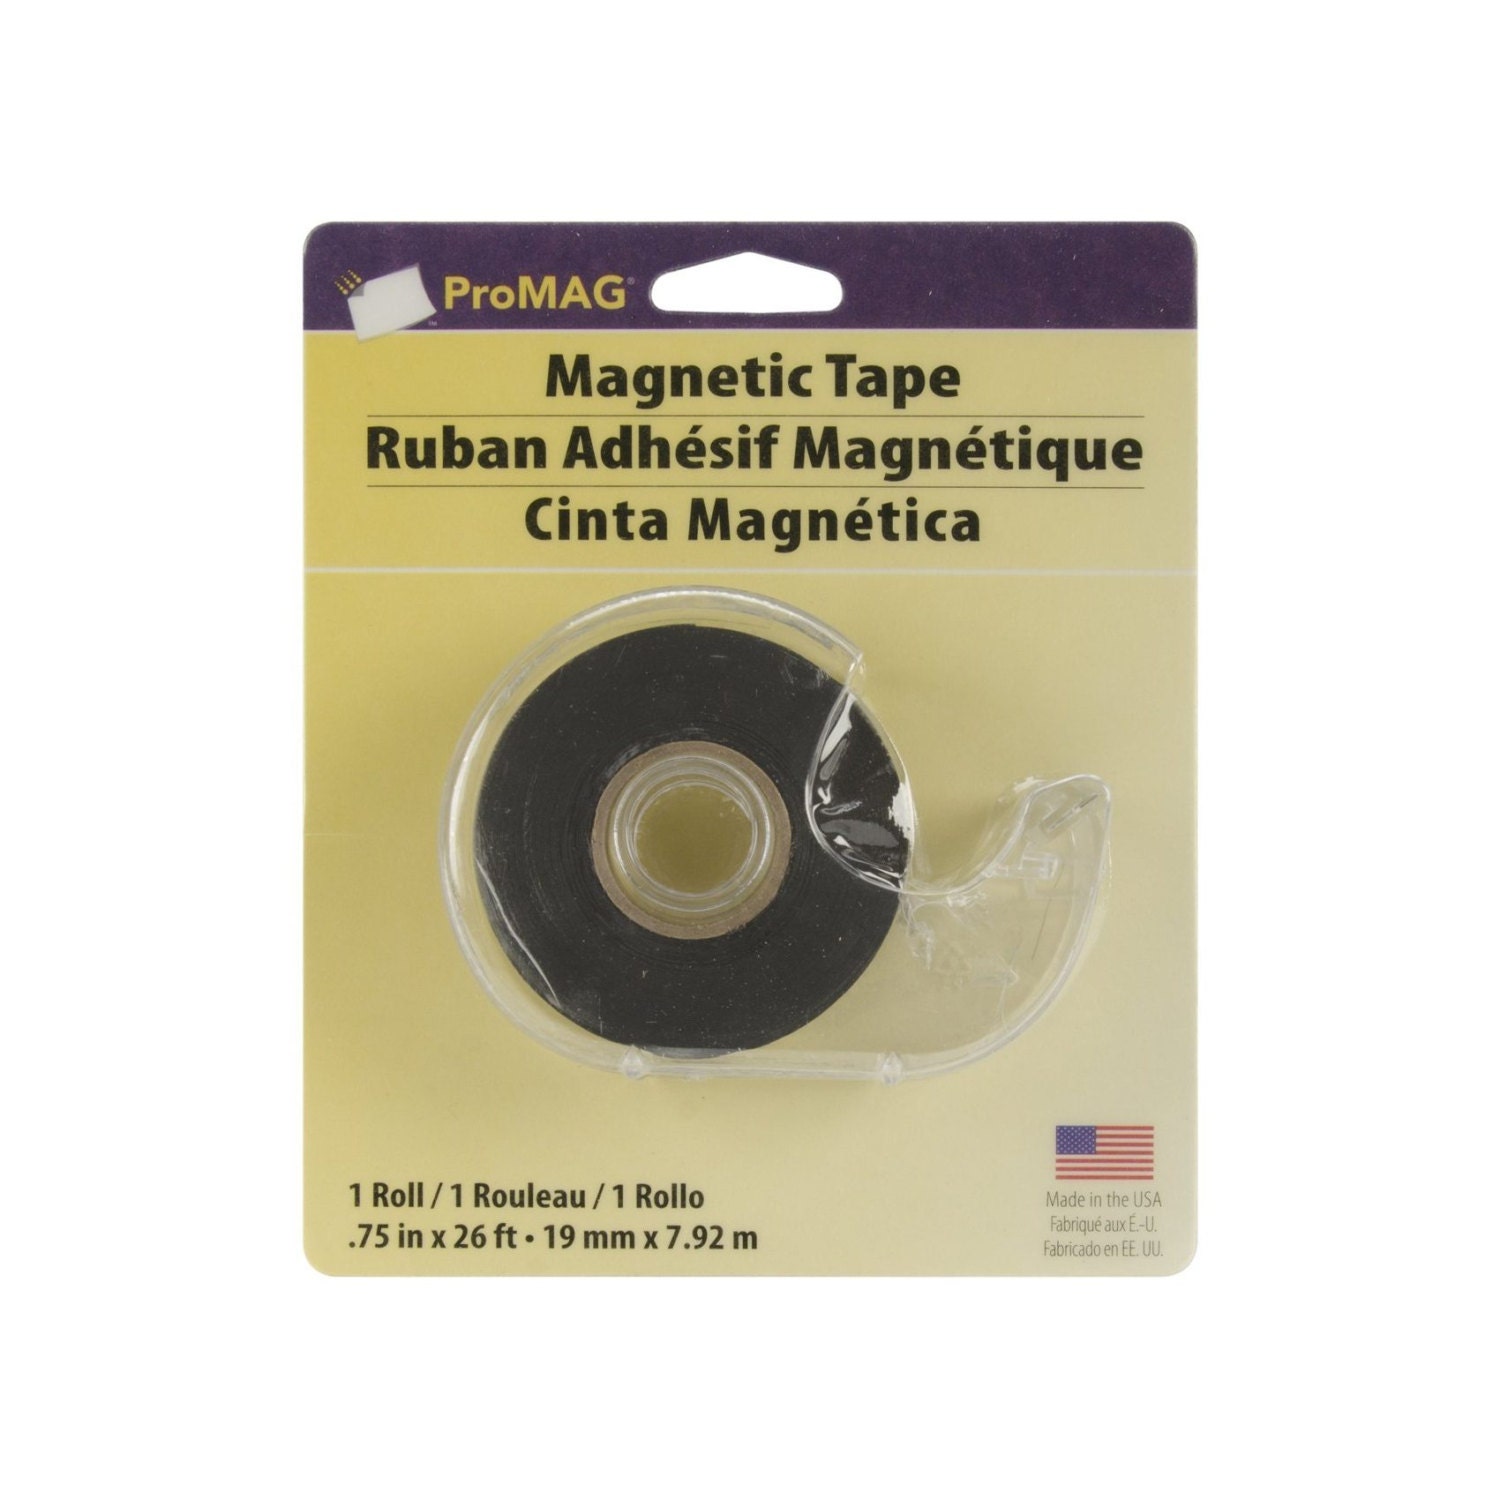 Thin Magnetic Tape With Dispenser, 3/4 19mm X 25 Feet 7.92 Meters